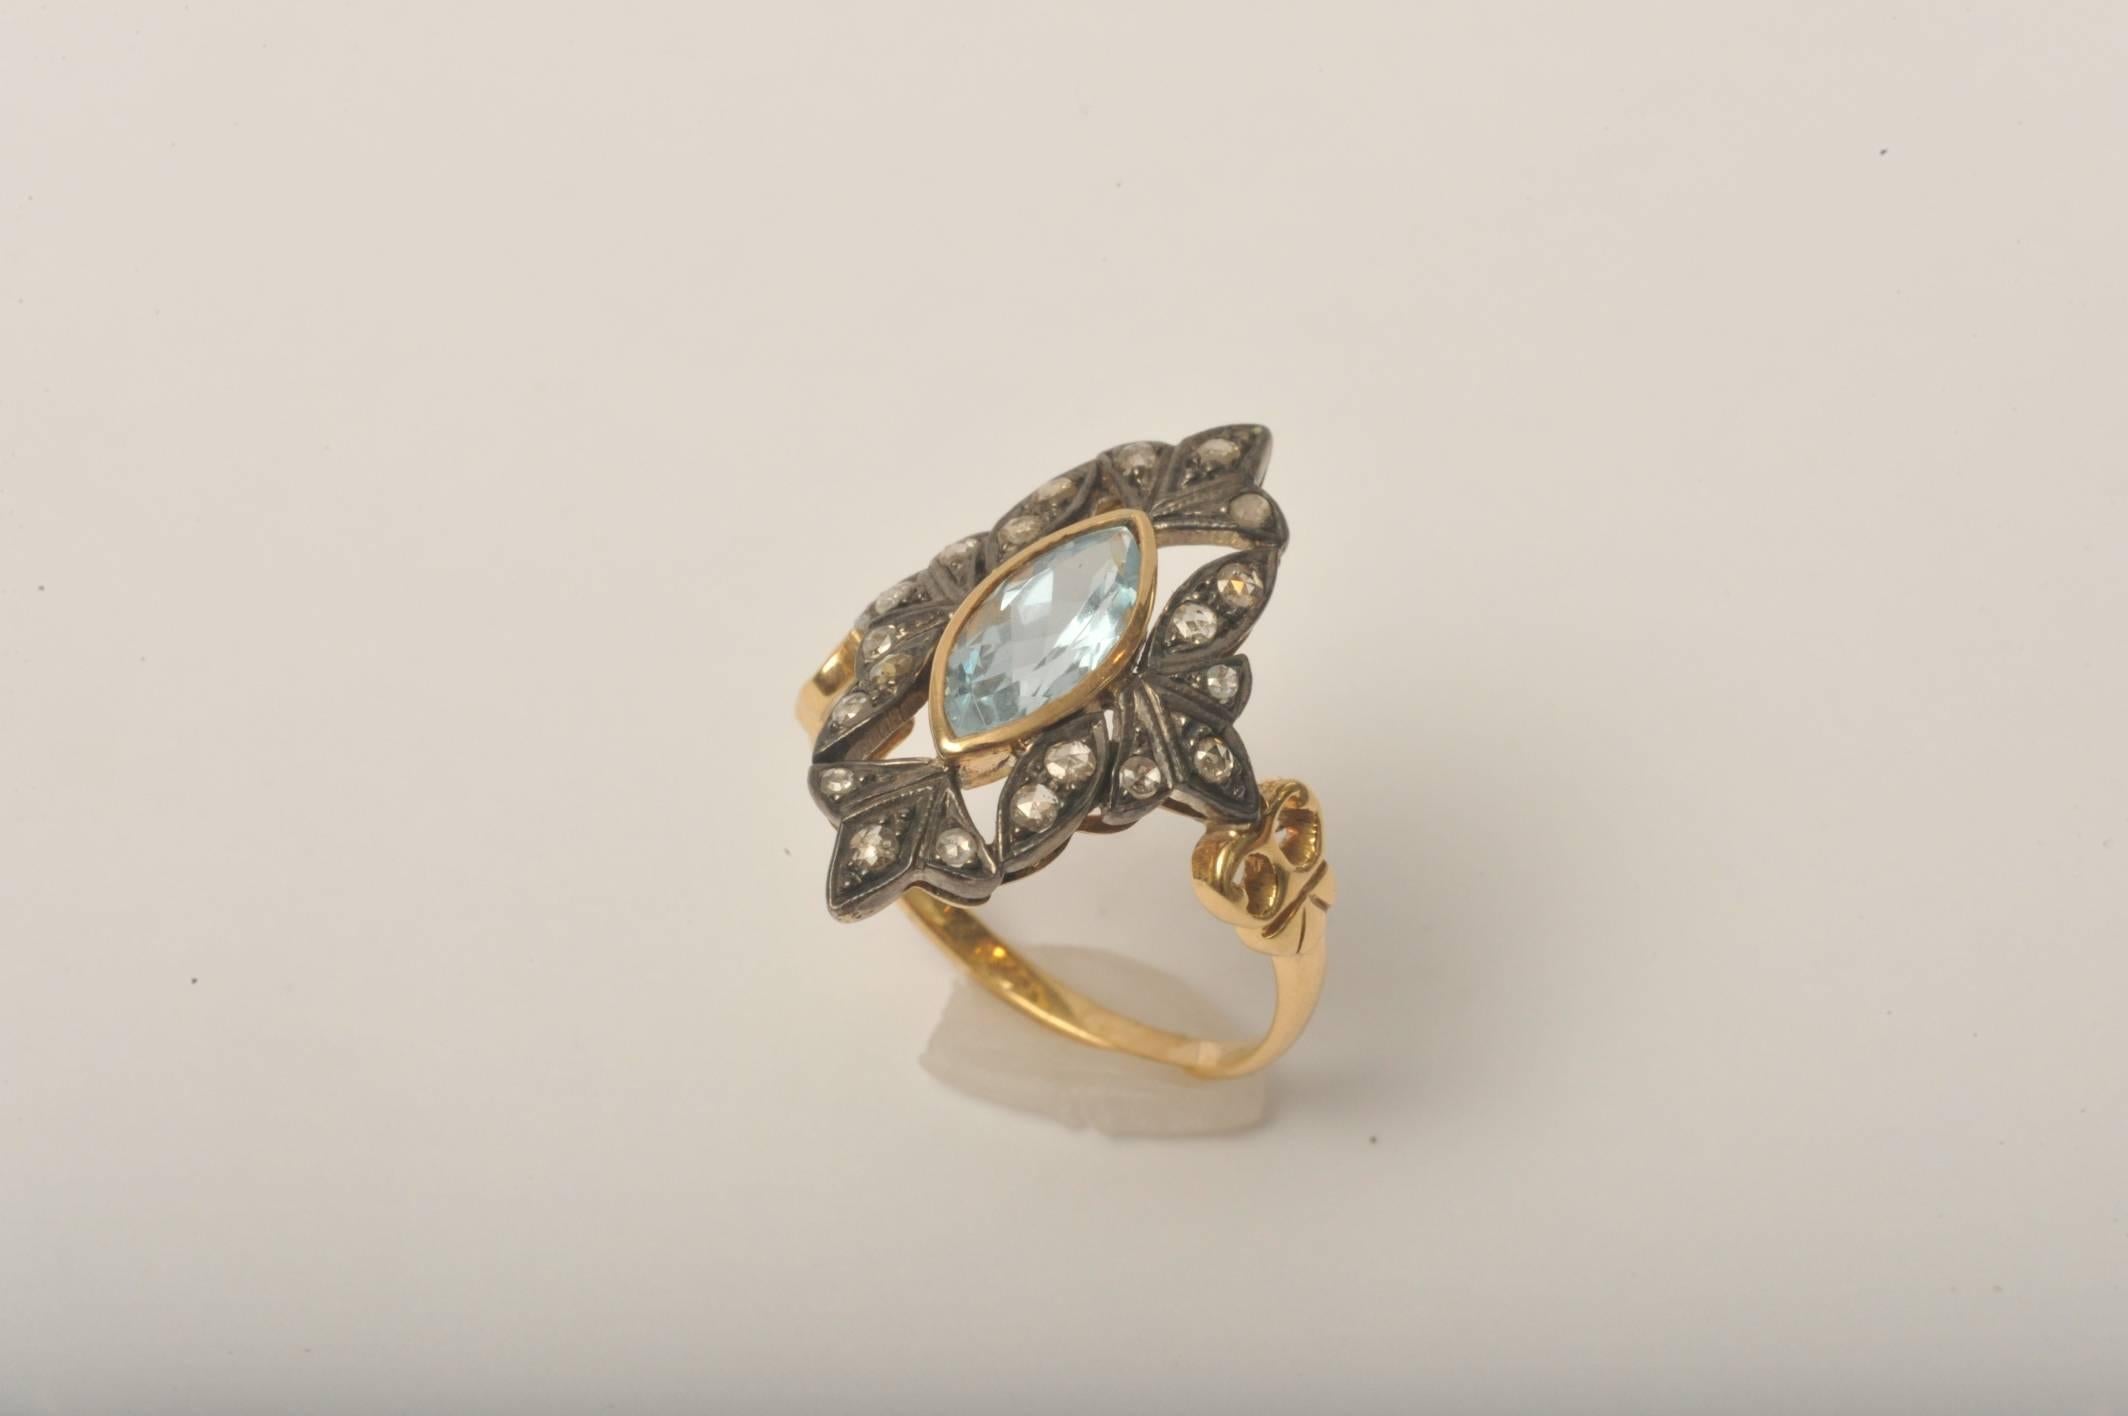 Marquise faceted center stone in aquamarine bordered in 18K gold. Great clarity and quality to the stone.  It is surrounded in round, brilliant cut, pave`-set diamonds set in an oxidized sterling silver with an 18K gold band.  Carat weight of the